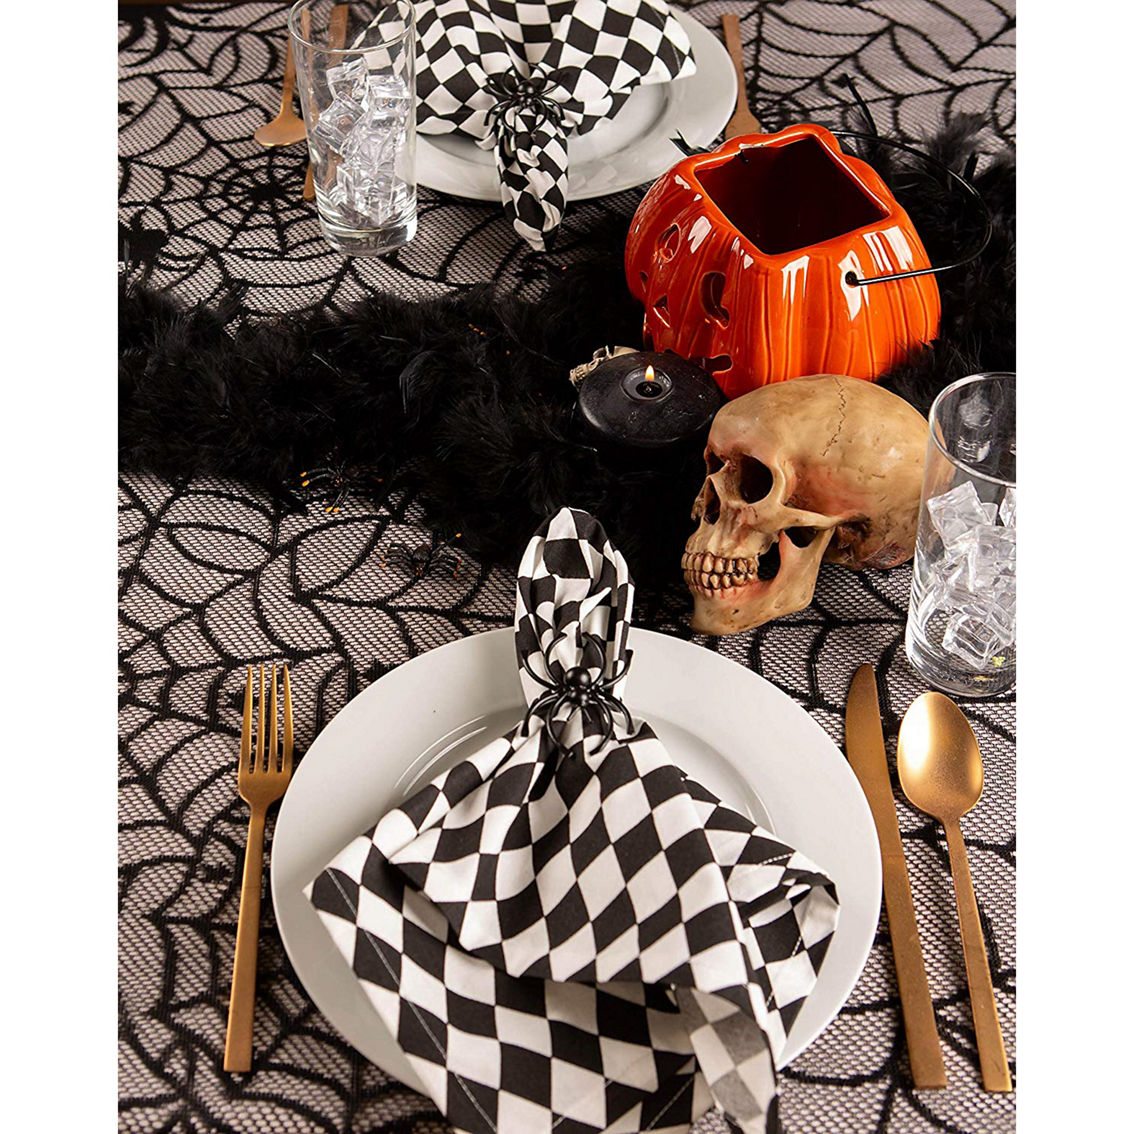 Design Imports 54 in. x 72 in. Halloween Lace Tablecloth - Image 4 of 9